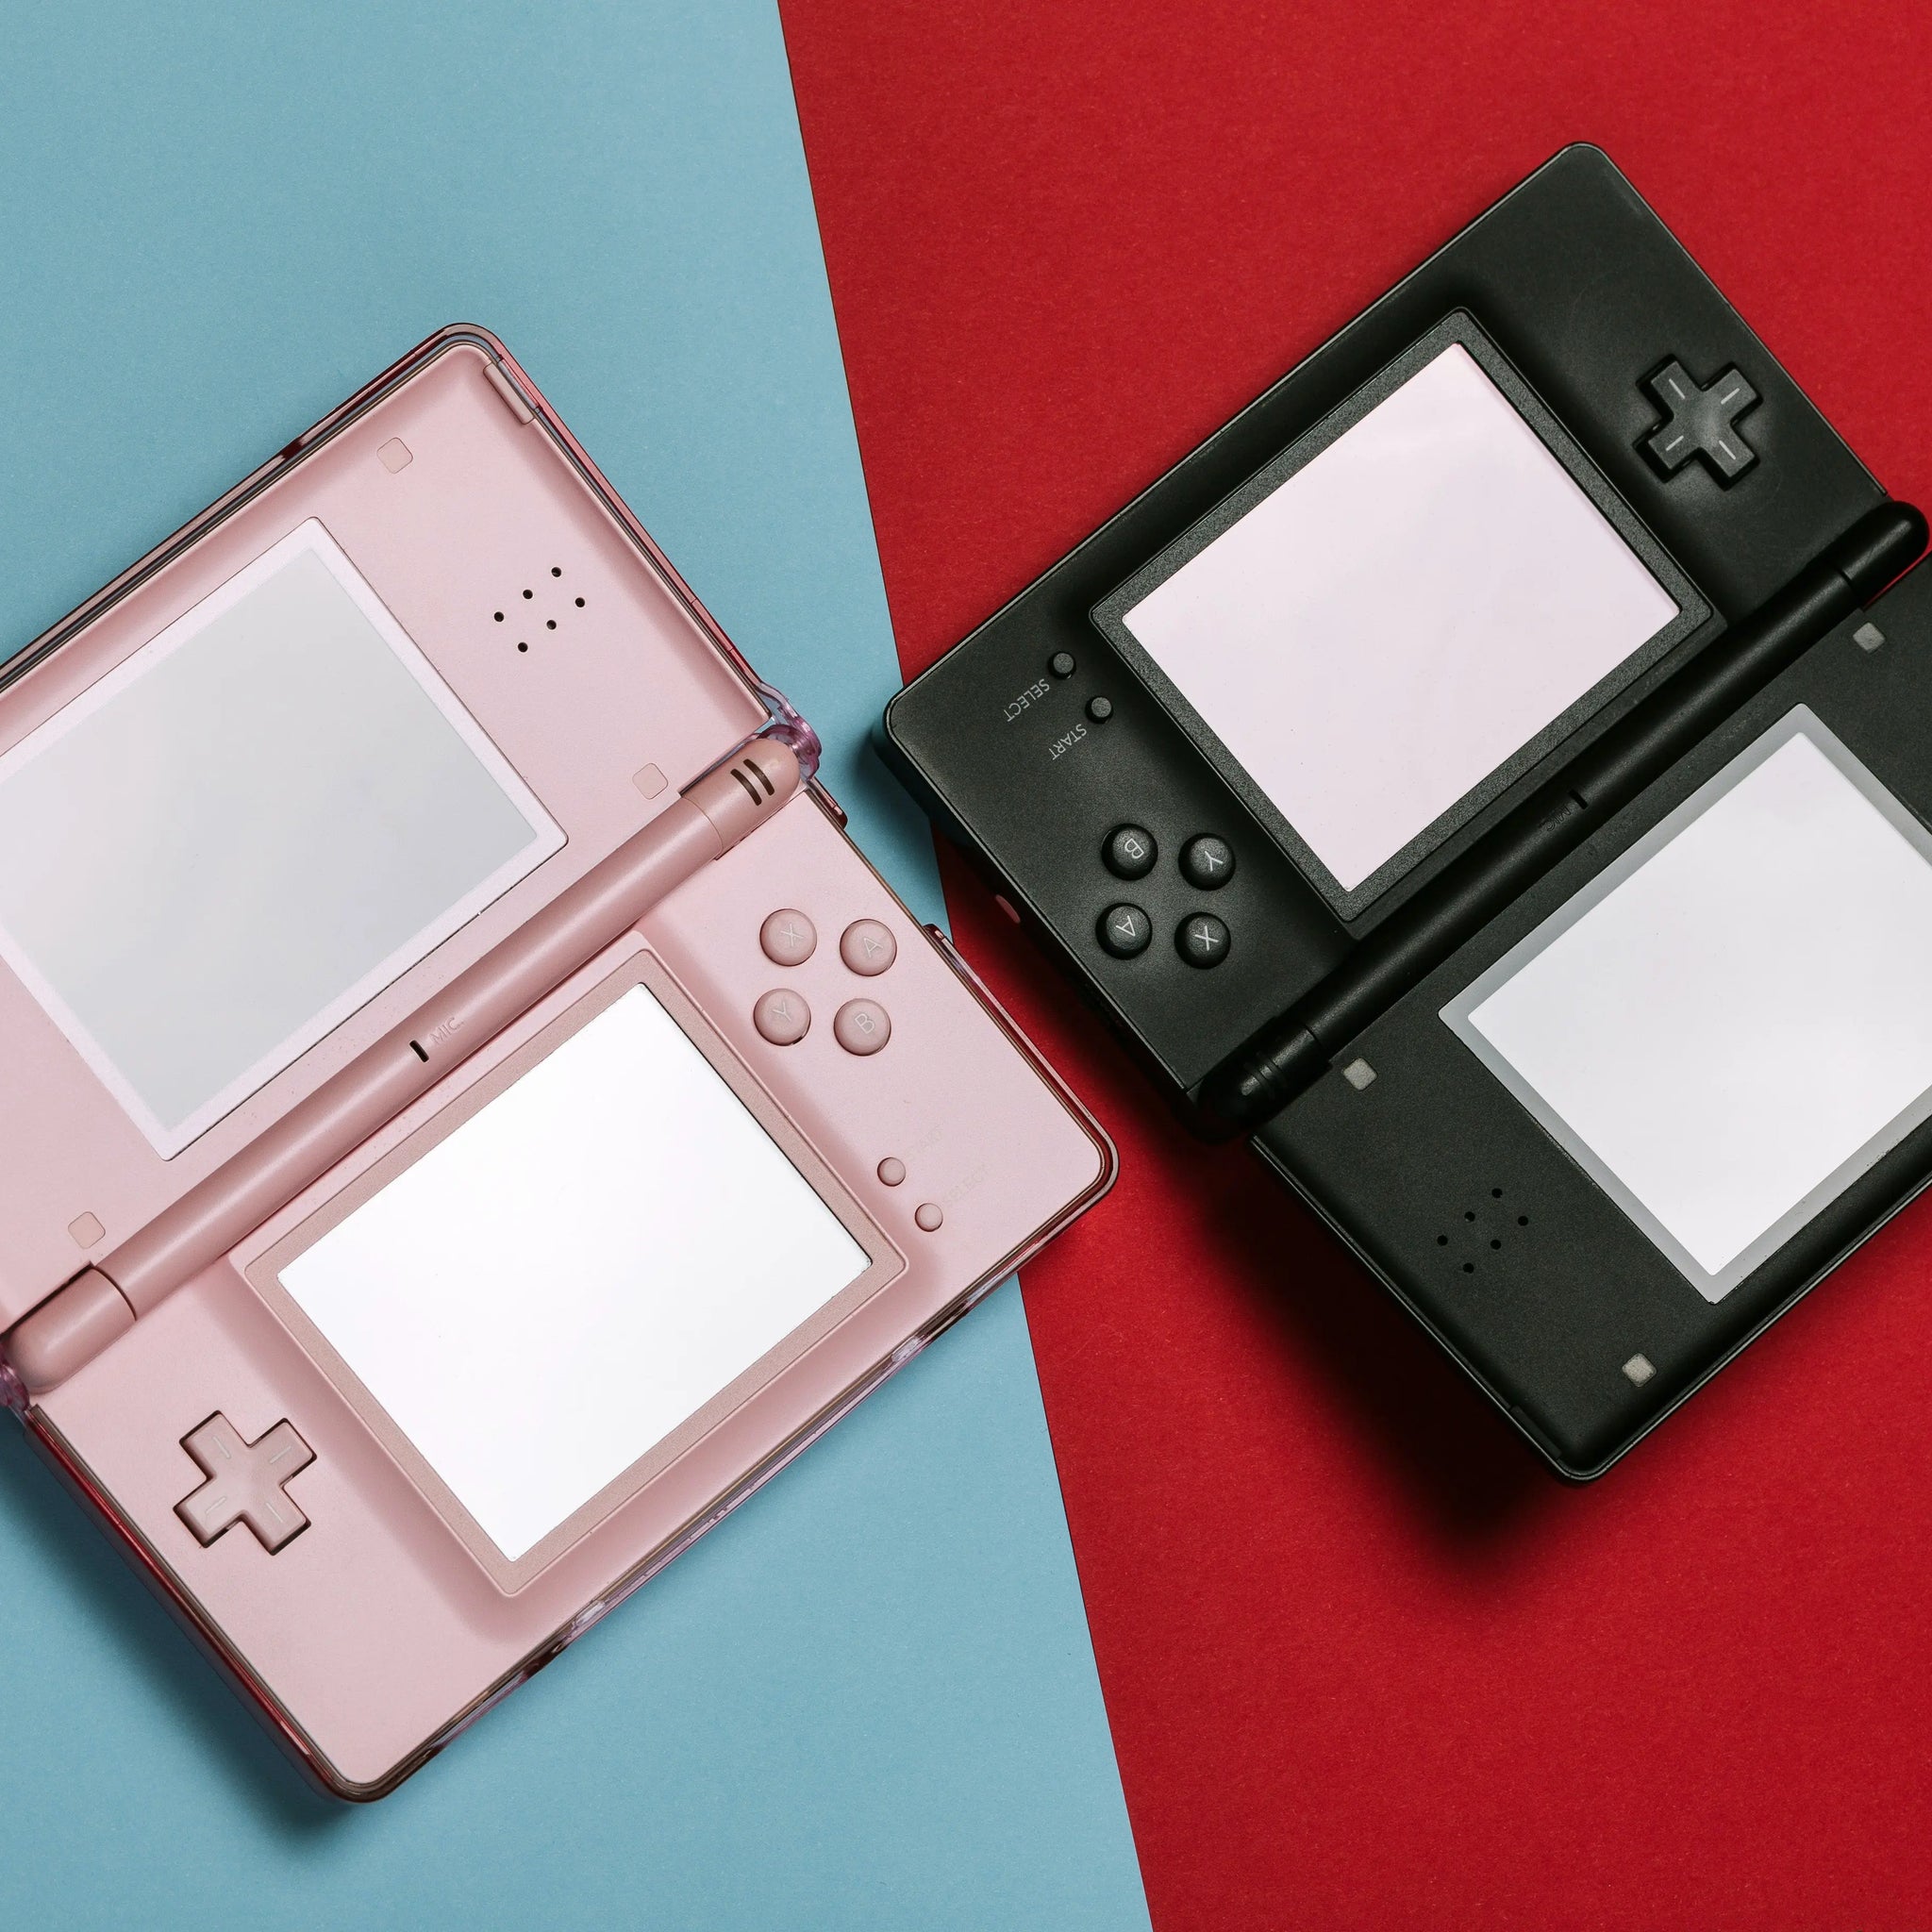 Which Nintendo Game Consoles do you have?